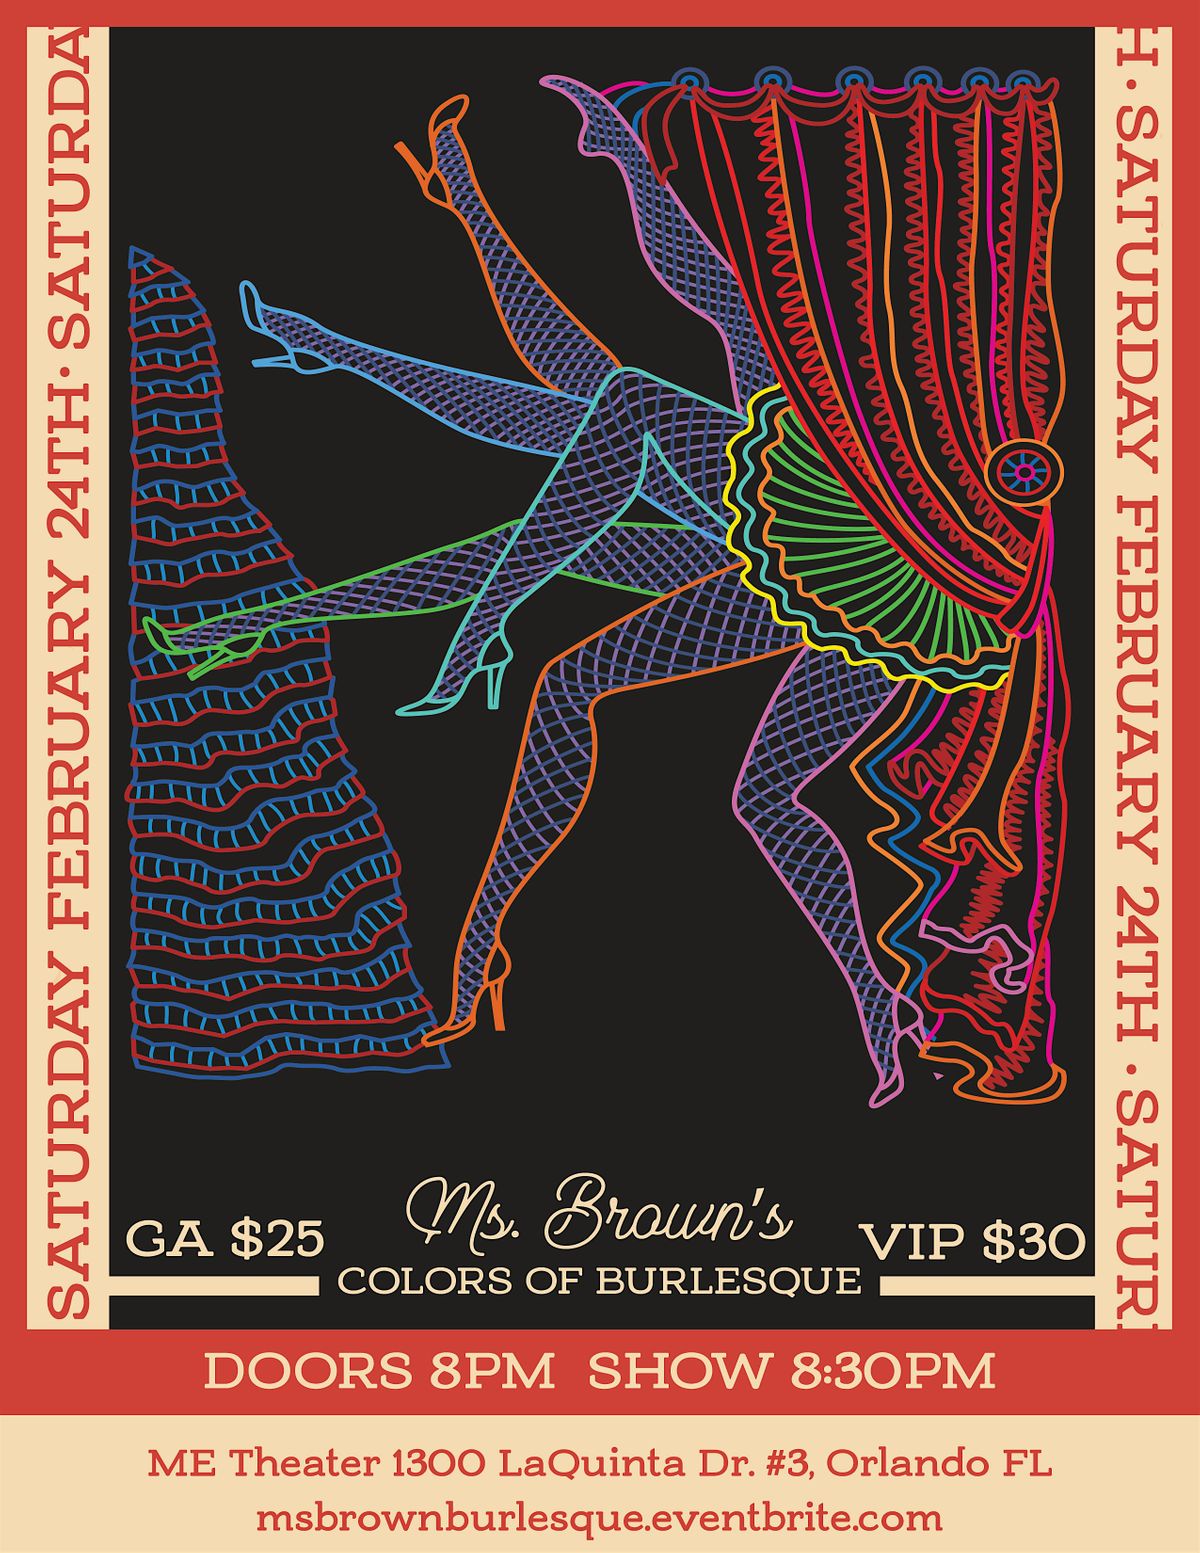 Ms. Brown's Colors of Burlesque - The Summer Spectacular Show